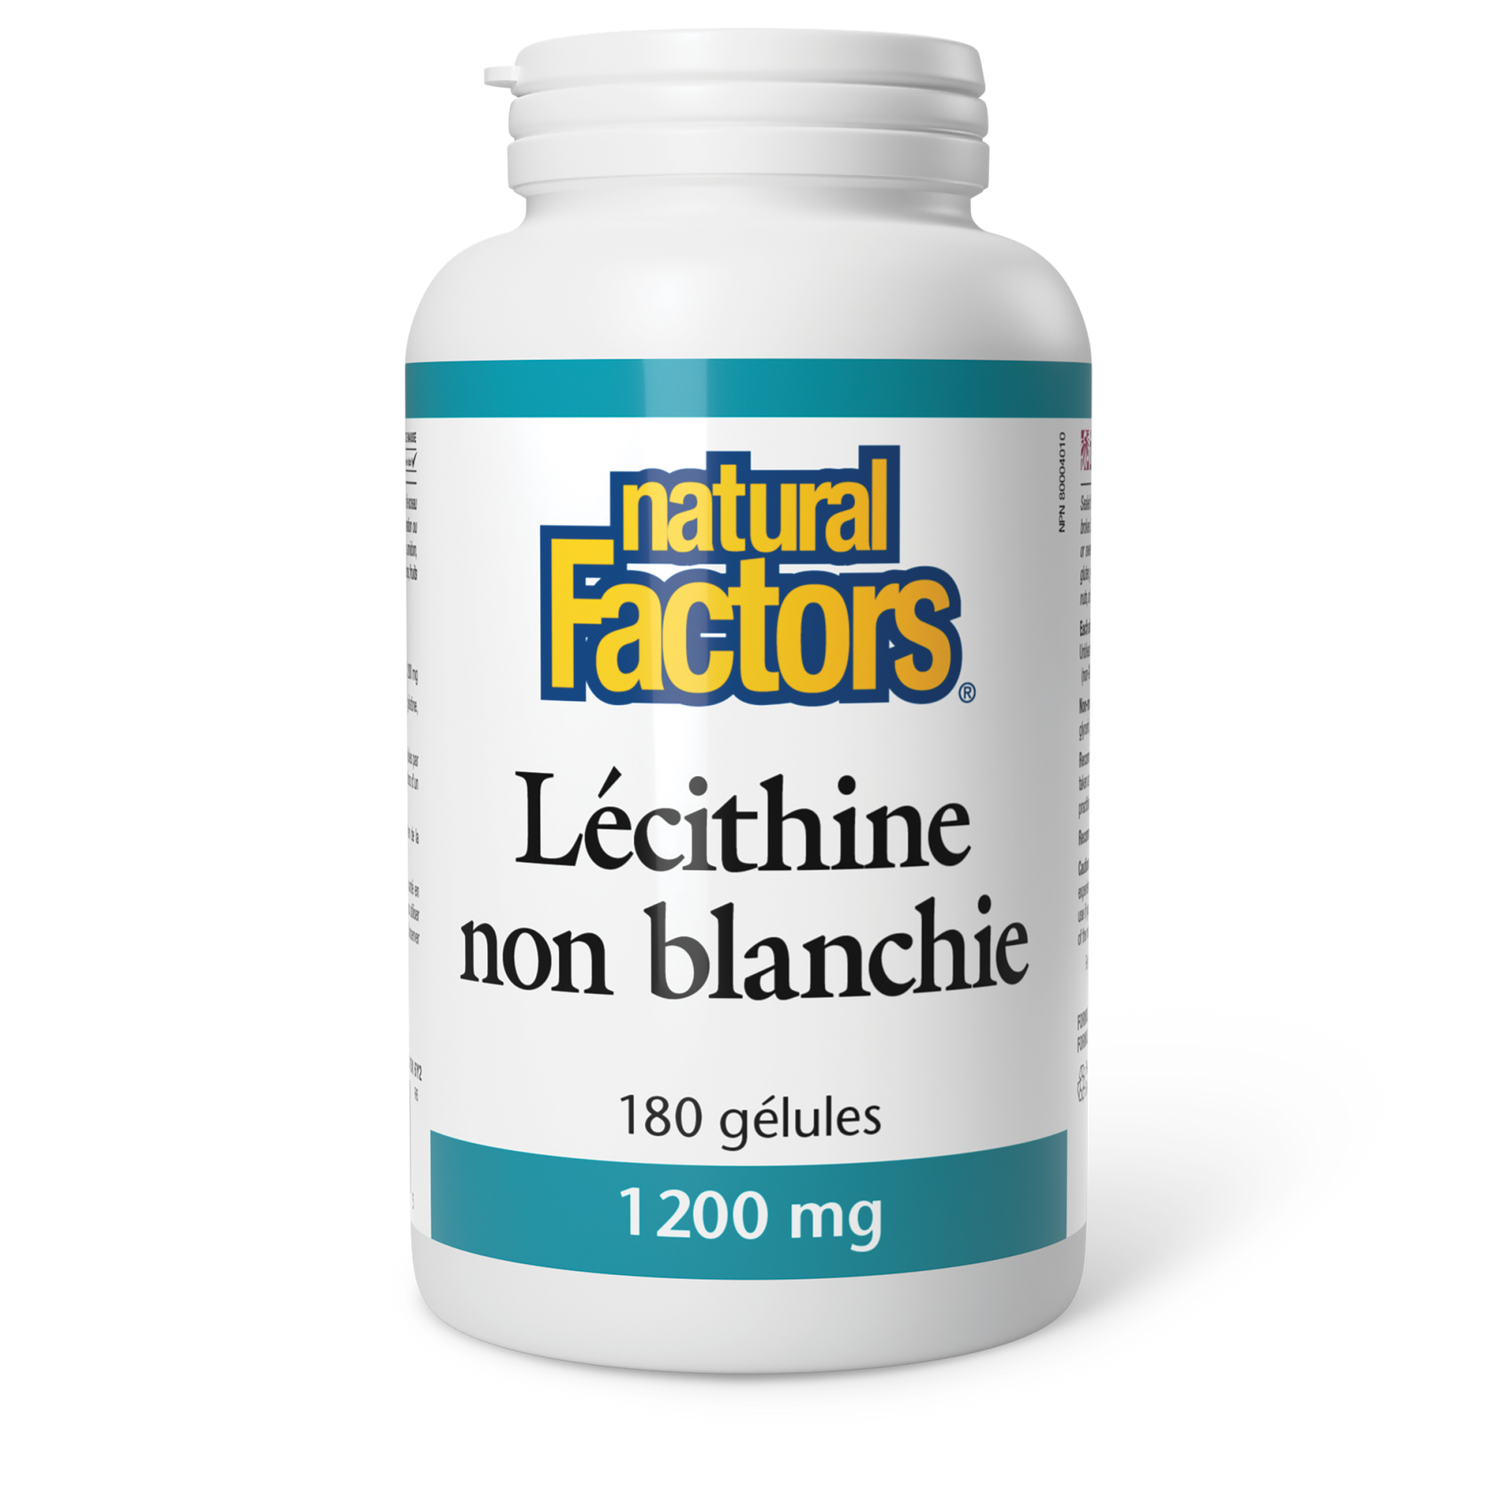 Lécithine non blanchie 1 200 mg, Natural Factors|v|image|2601